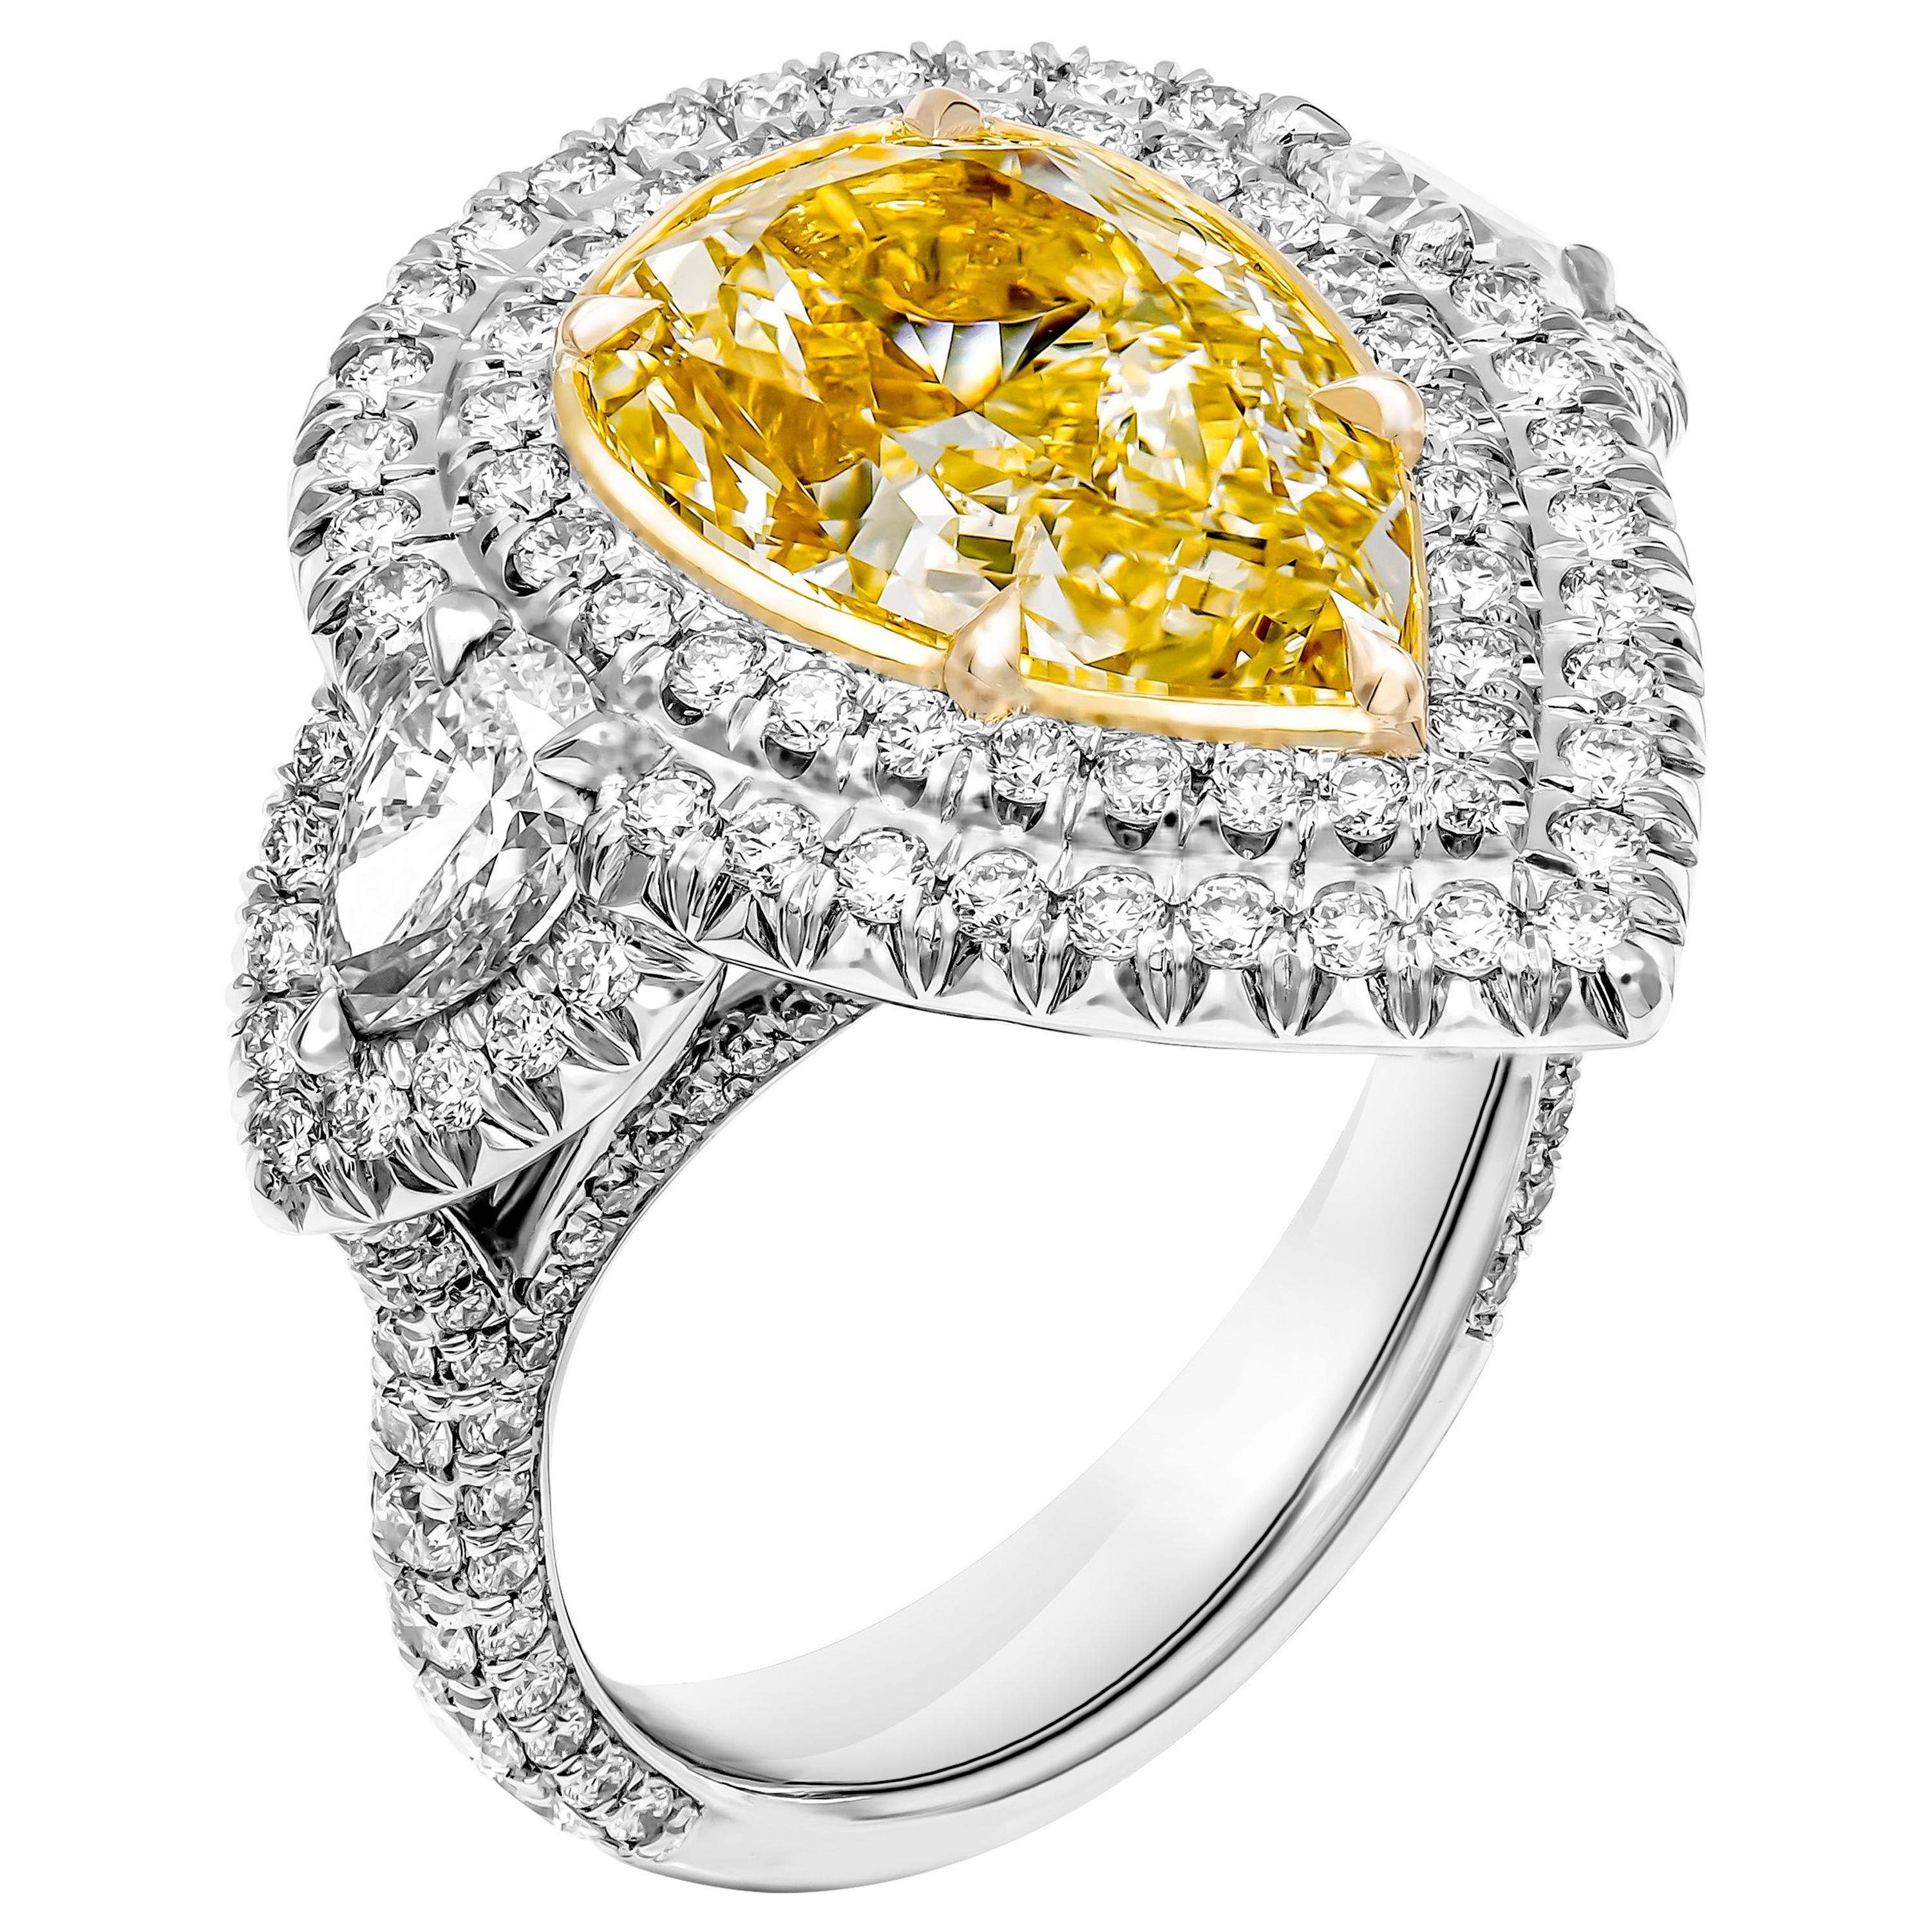 GIA Certified 3-Stone Ring with 5.27 Carat Fancy Light Yellow VS2 Pear Shape